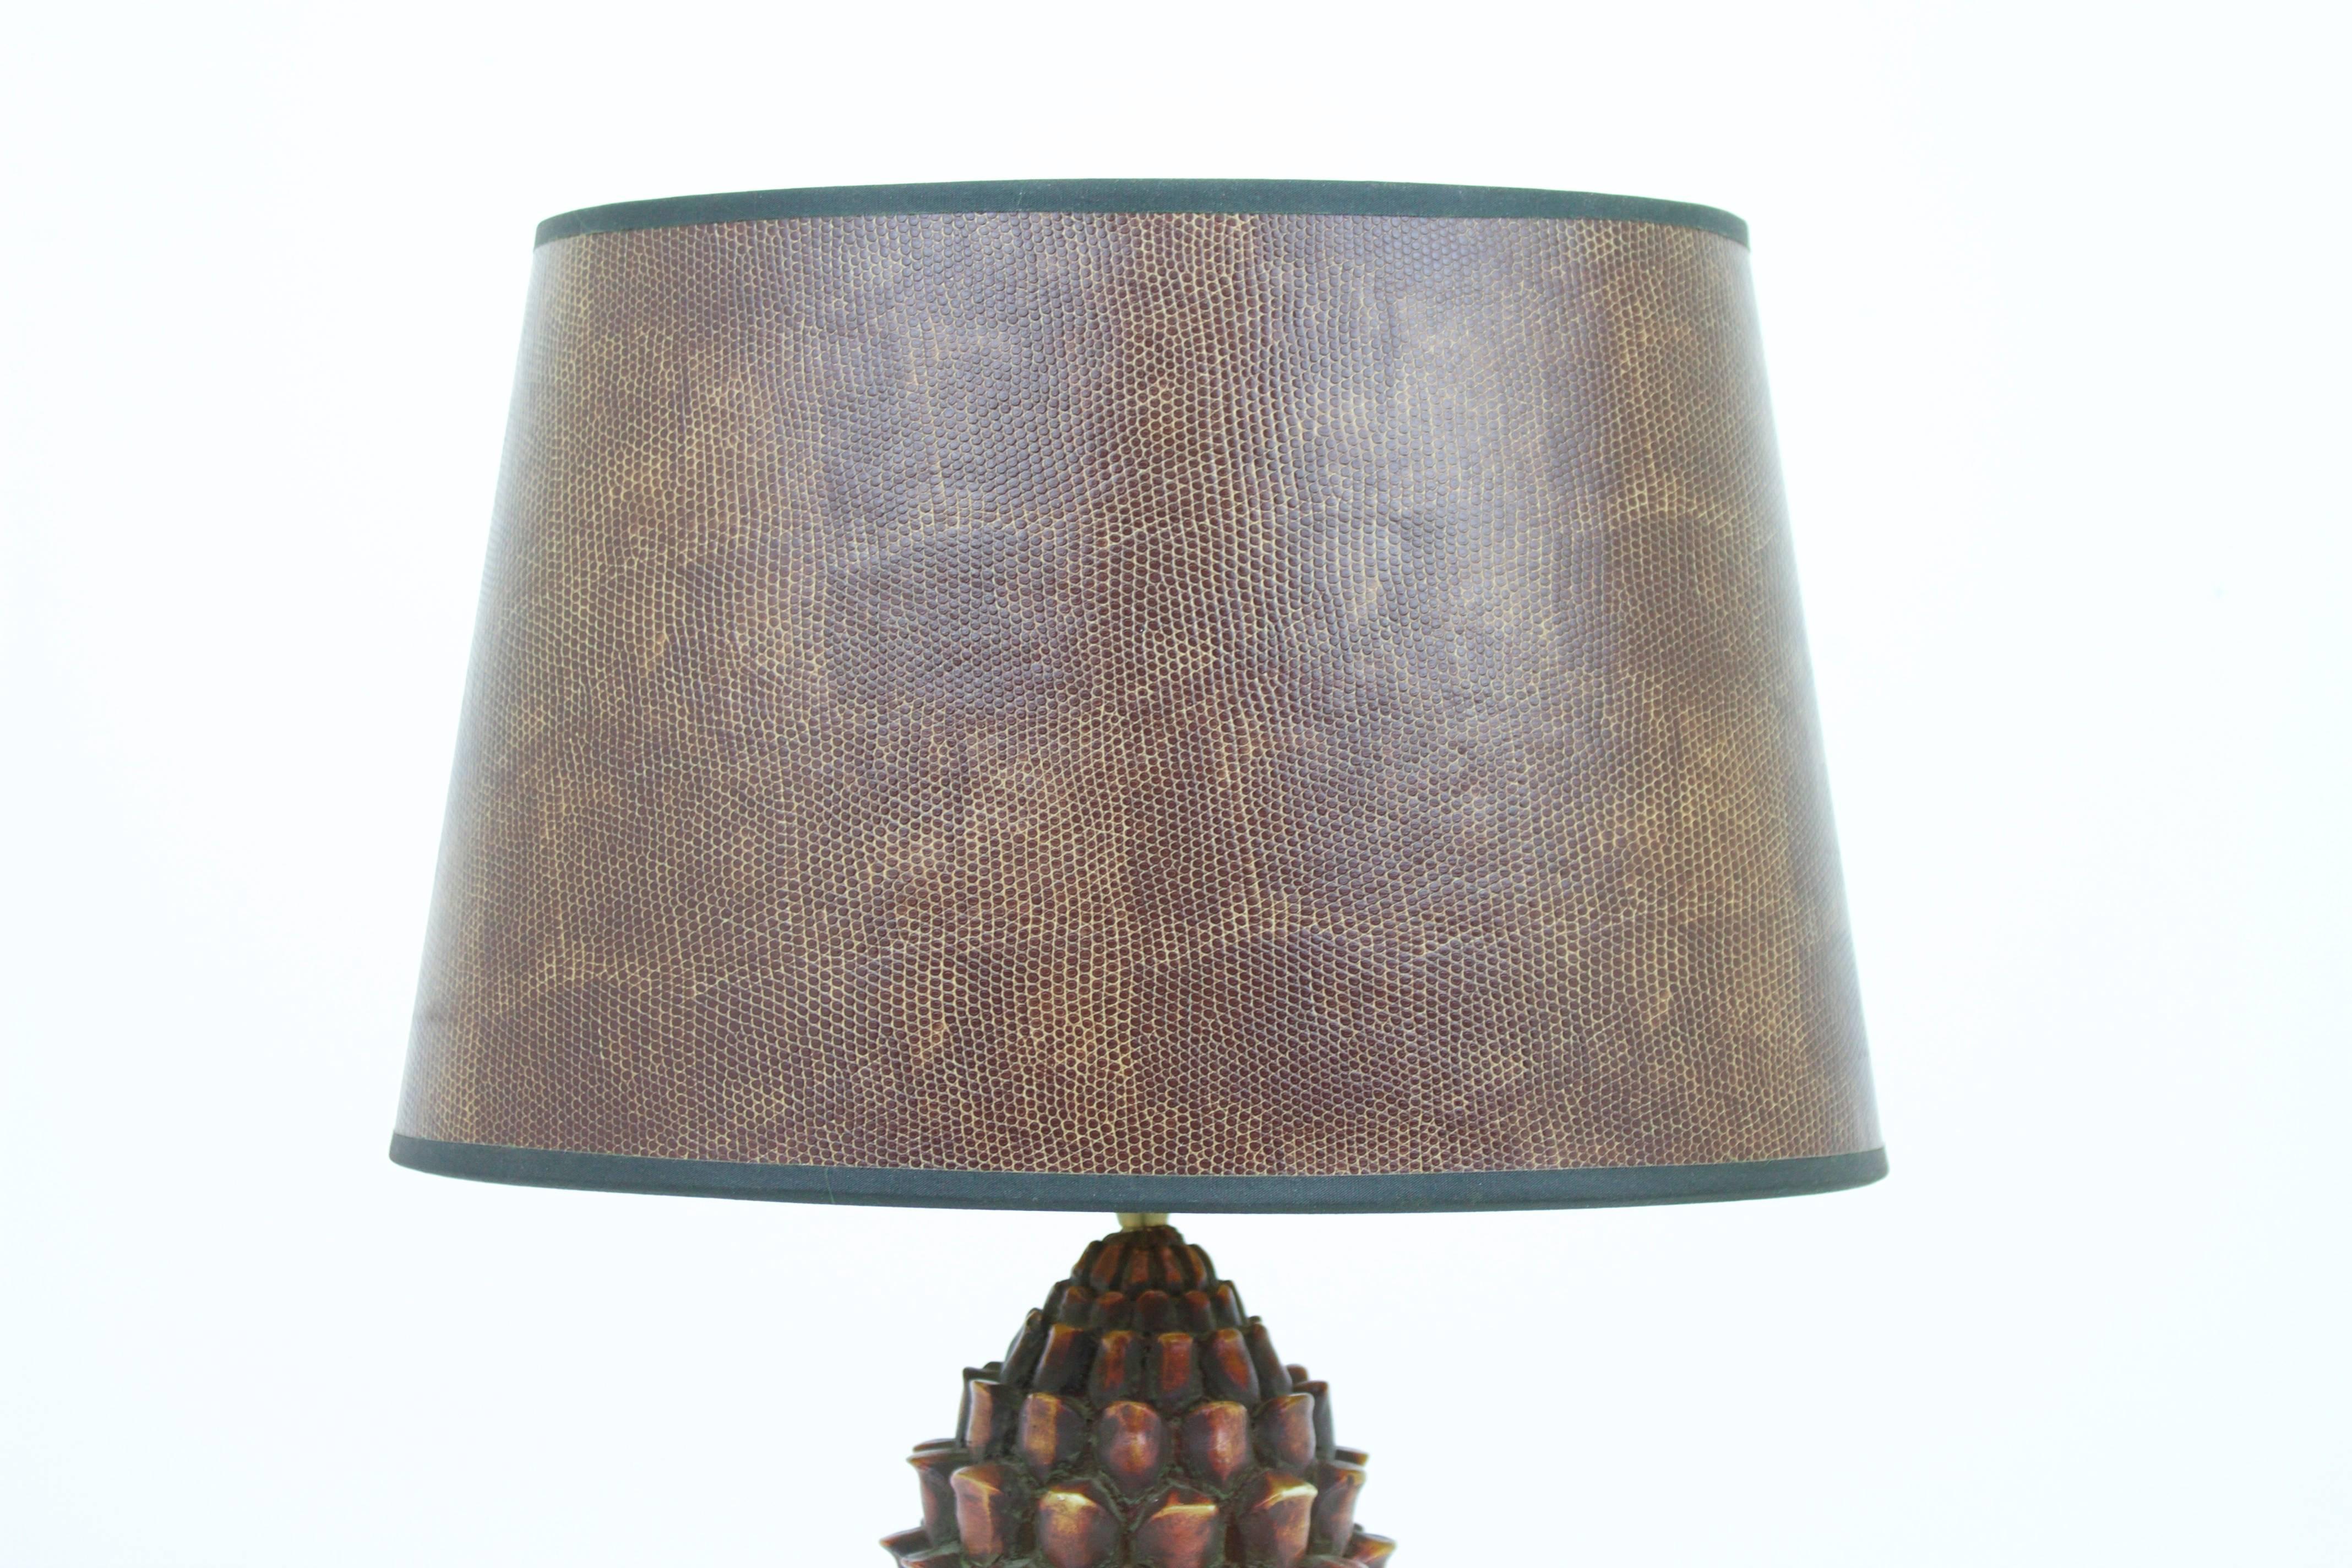 Nice pineapple table lamp.

Good condition.

Worldwide shipping.